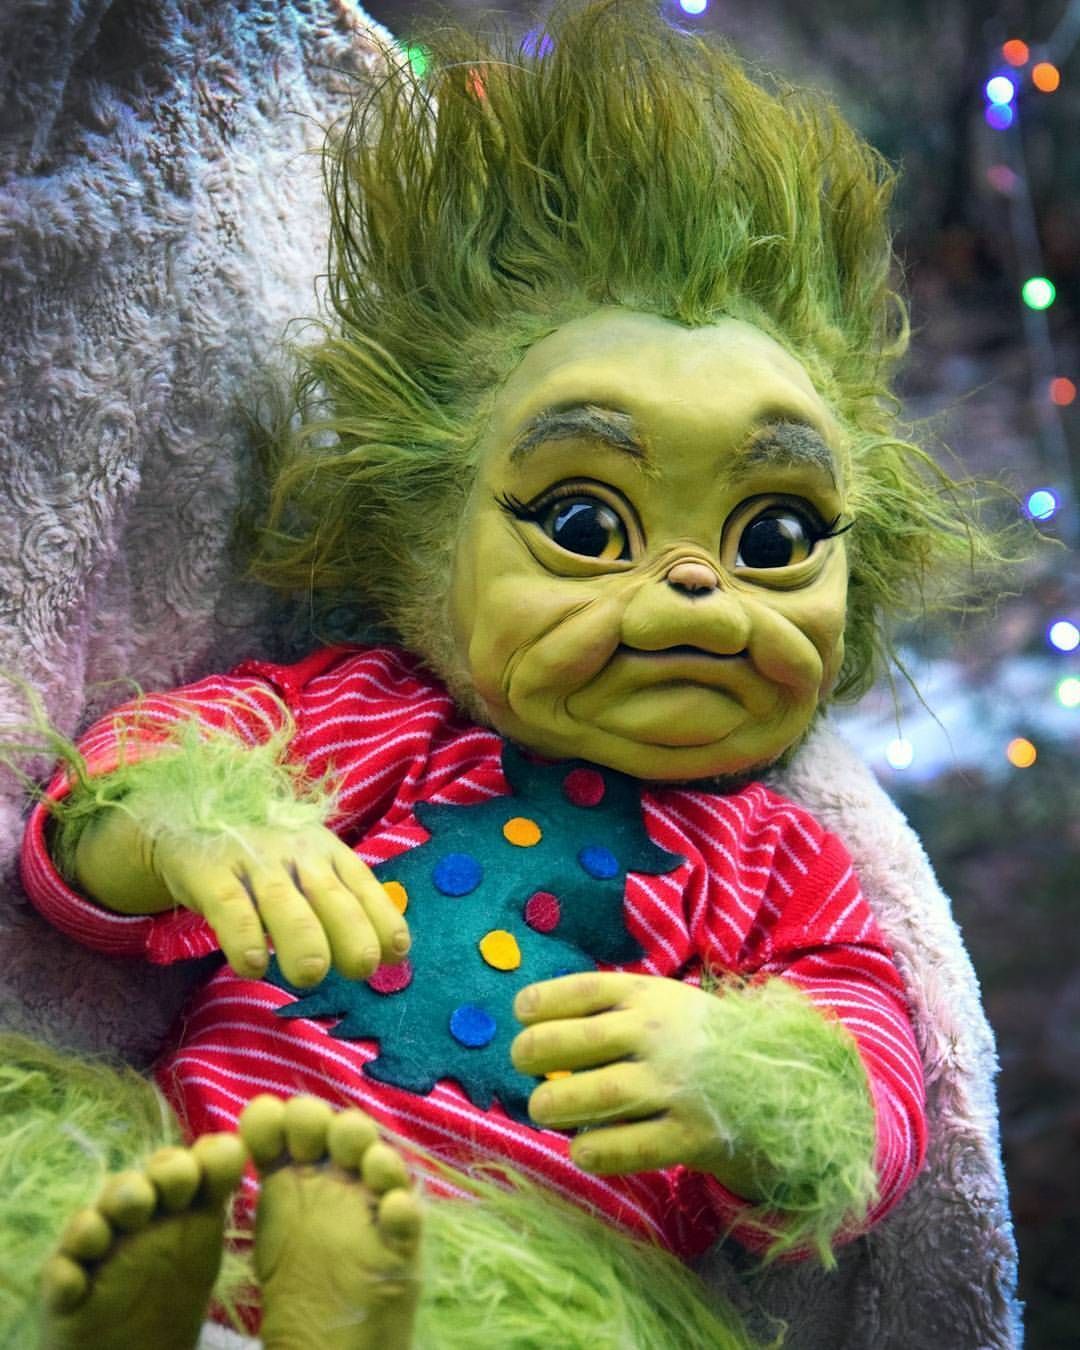 Grinch HD Wallpapers 1000 Free Grinch Wallpaper Images For All Devices